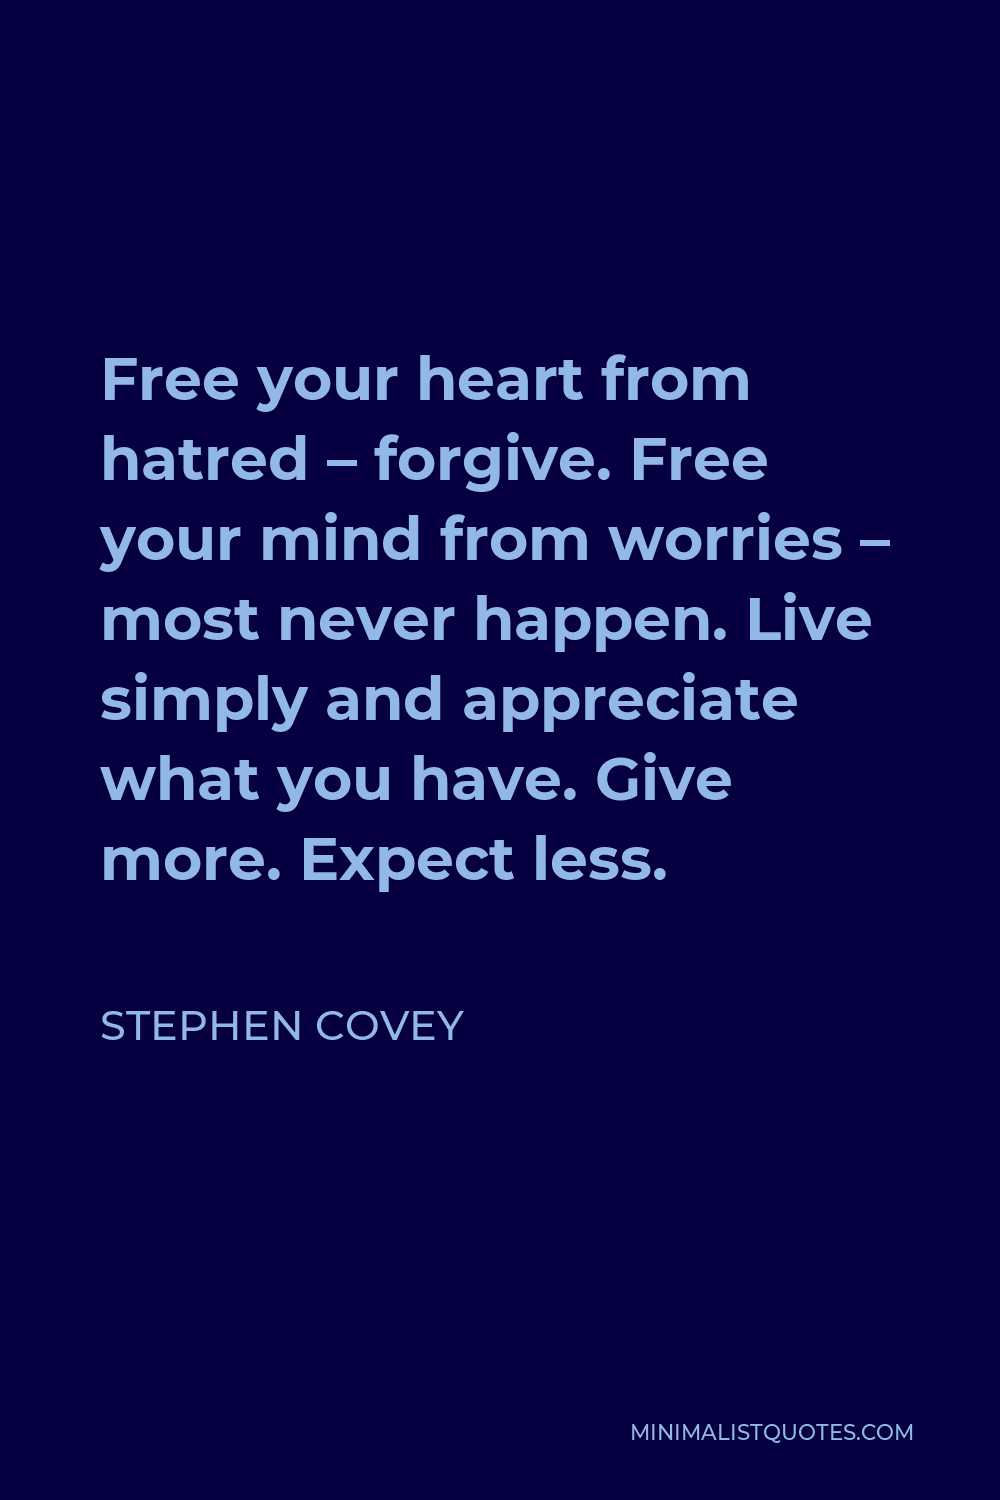 Stephen Covey Quote - Free your heart from hatred – forgive. Free your mind from worries – most never happen. Live simply and appreciate what you have. Give more. Expect less.